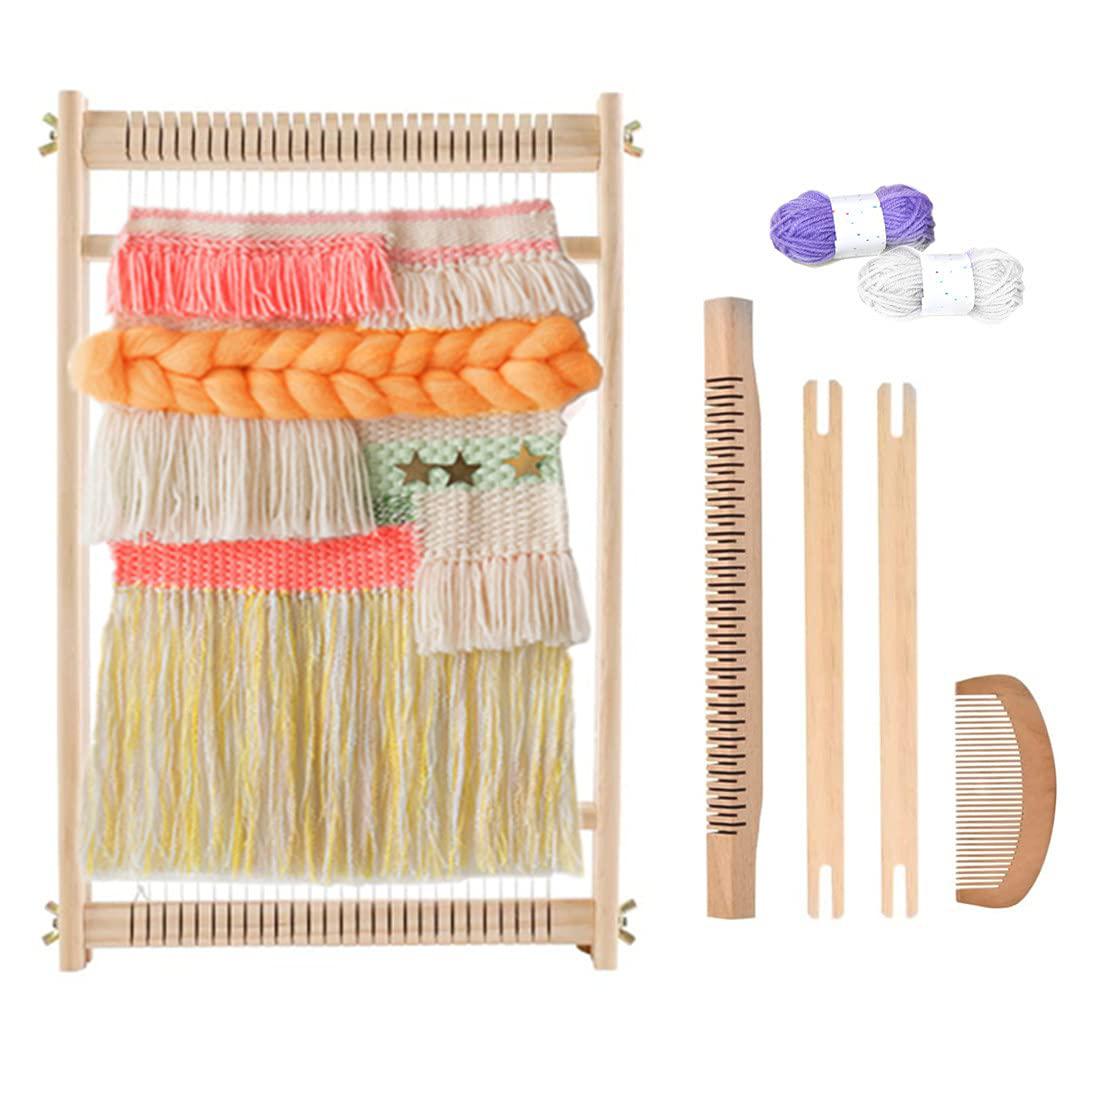 Ayasee wooden weaving loom, multi-craft weaving frame to handcraft for kids  and beginners, 15.7 x 11.8in/ 40 x 30cm